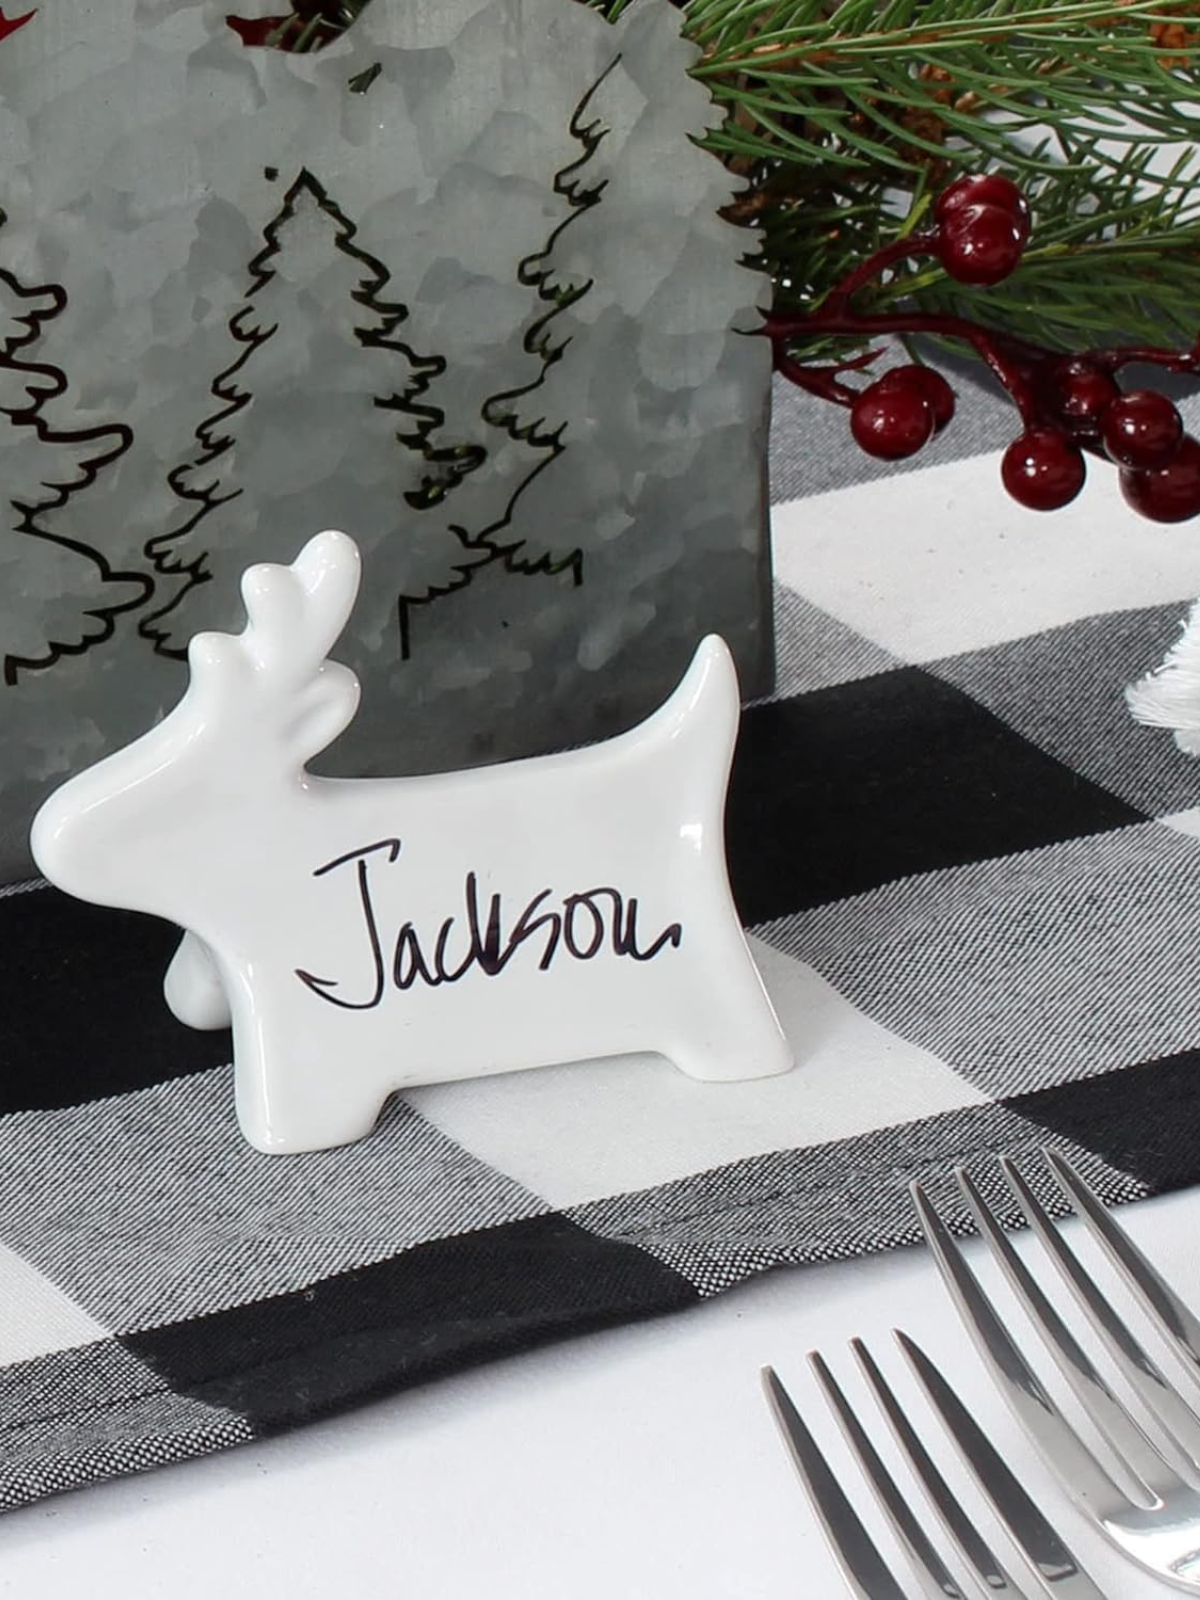 Reindeer Place Card Holders (12-Pack), Ceramic Reusable Write-On Wipe-Off Christmas Place Card Stands for Table